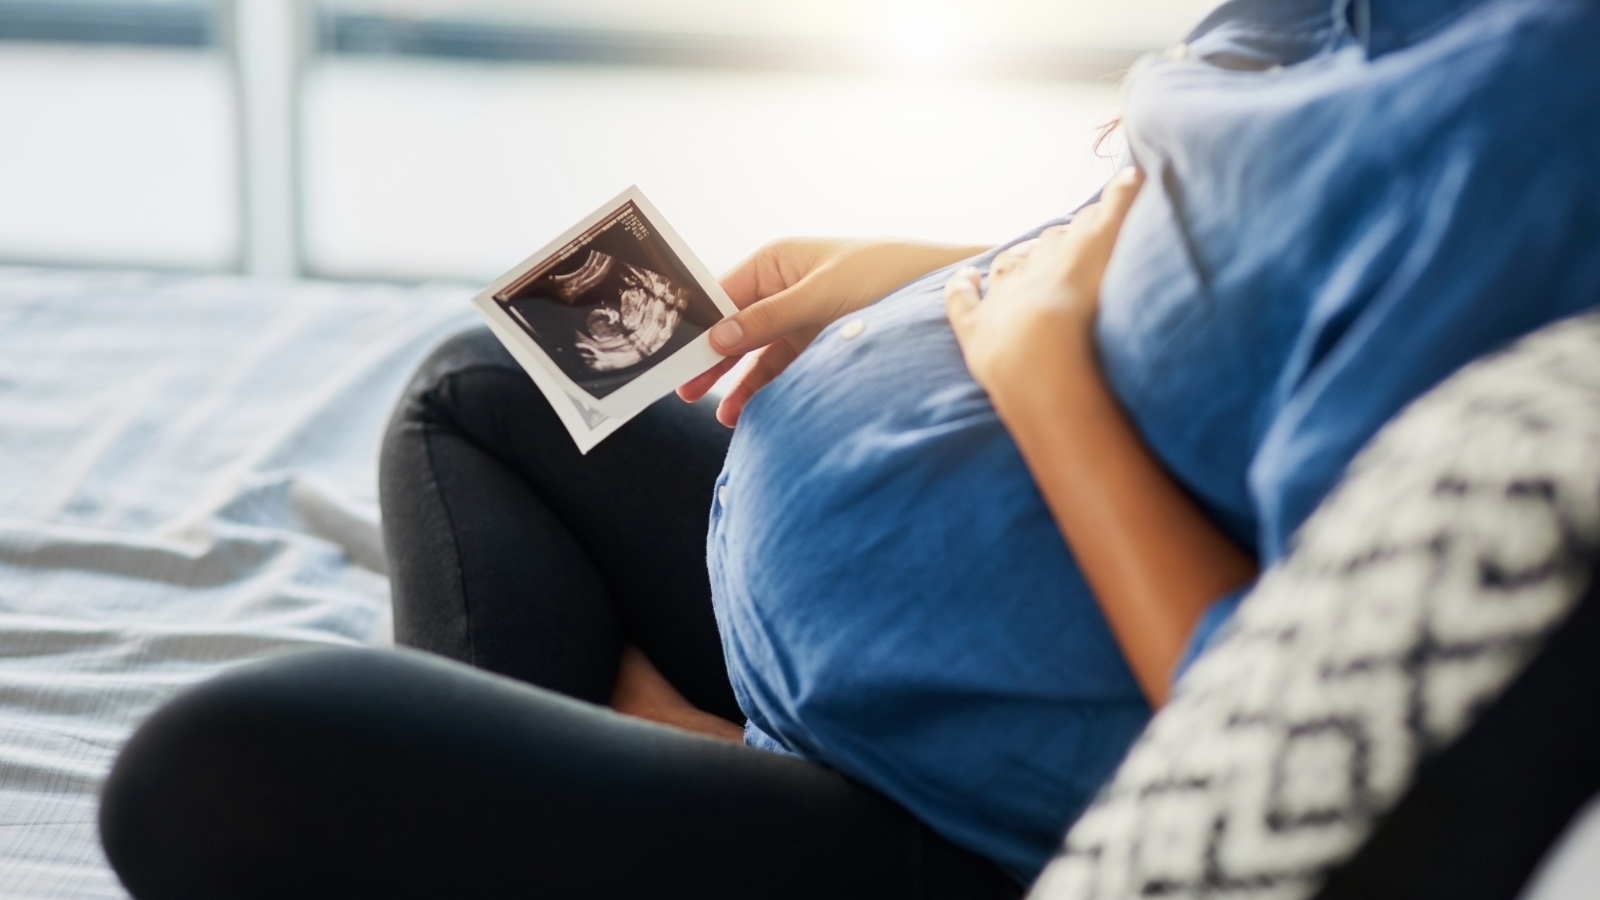 5 Pregnancy Health Tips to Prepare for Parenthood